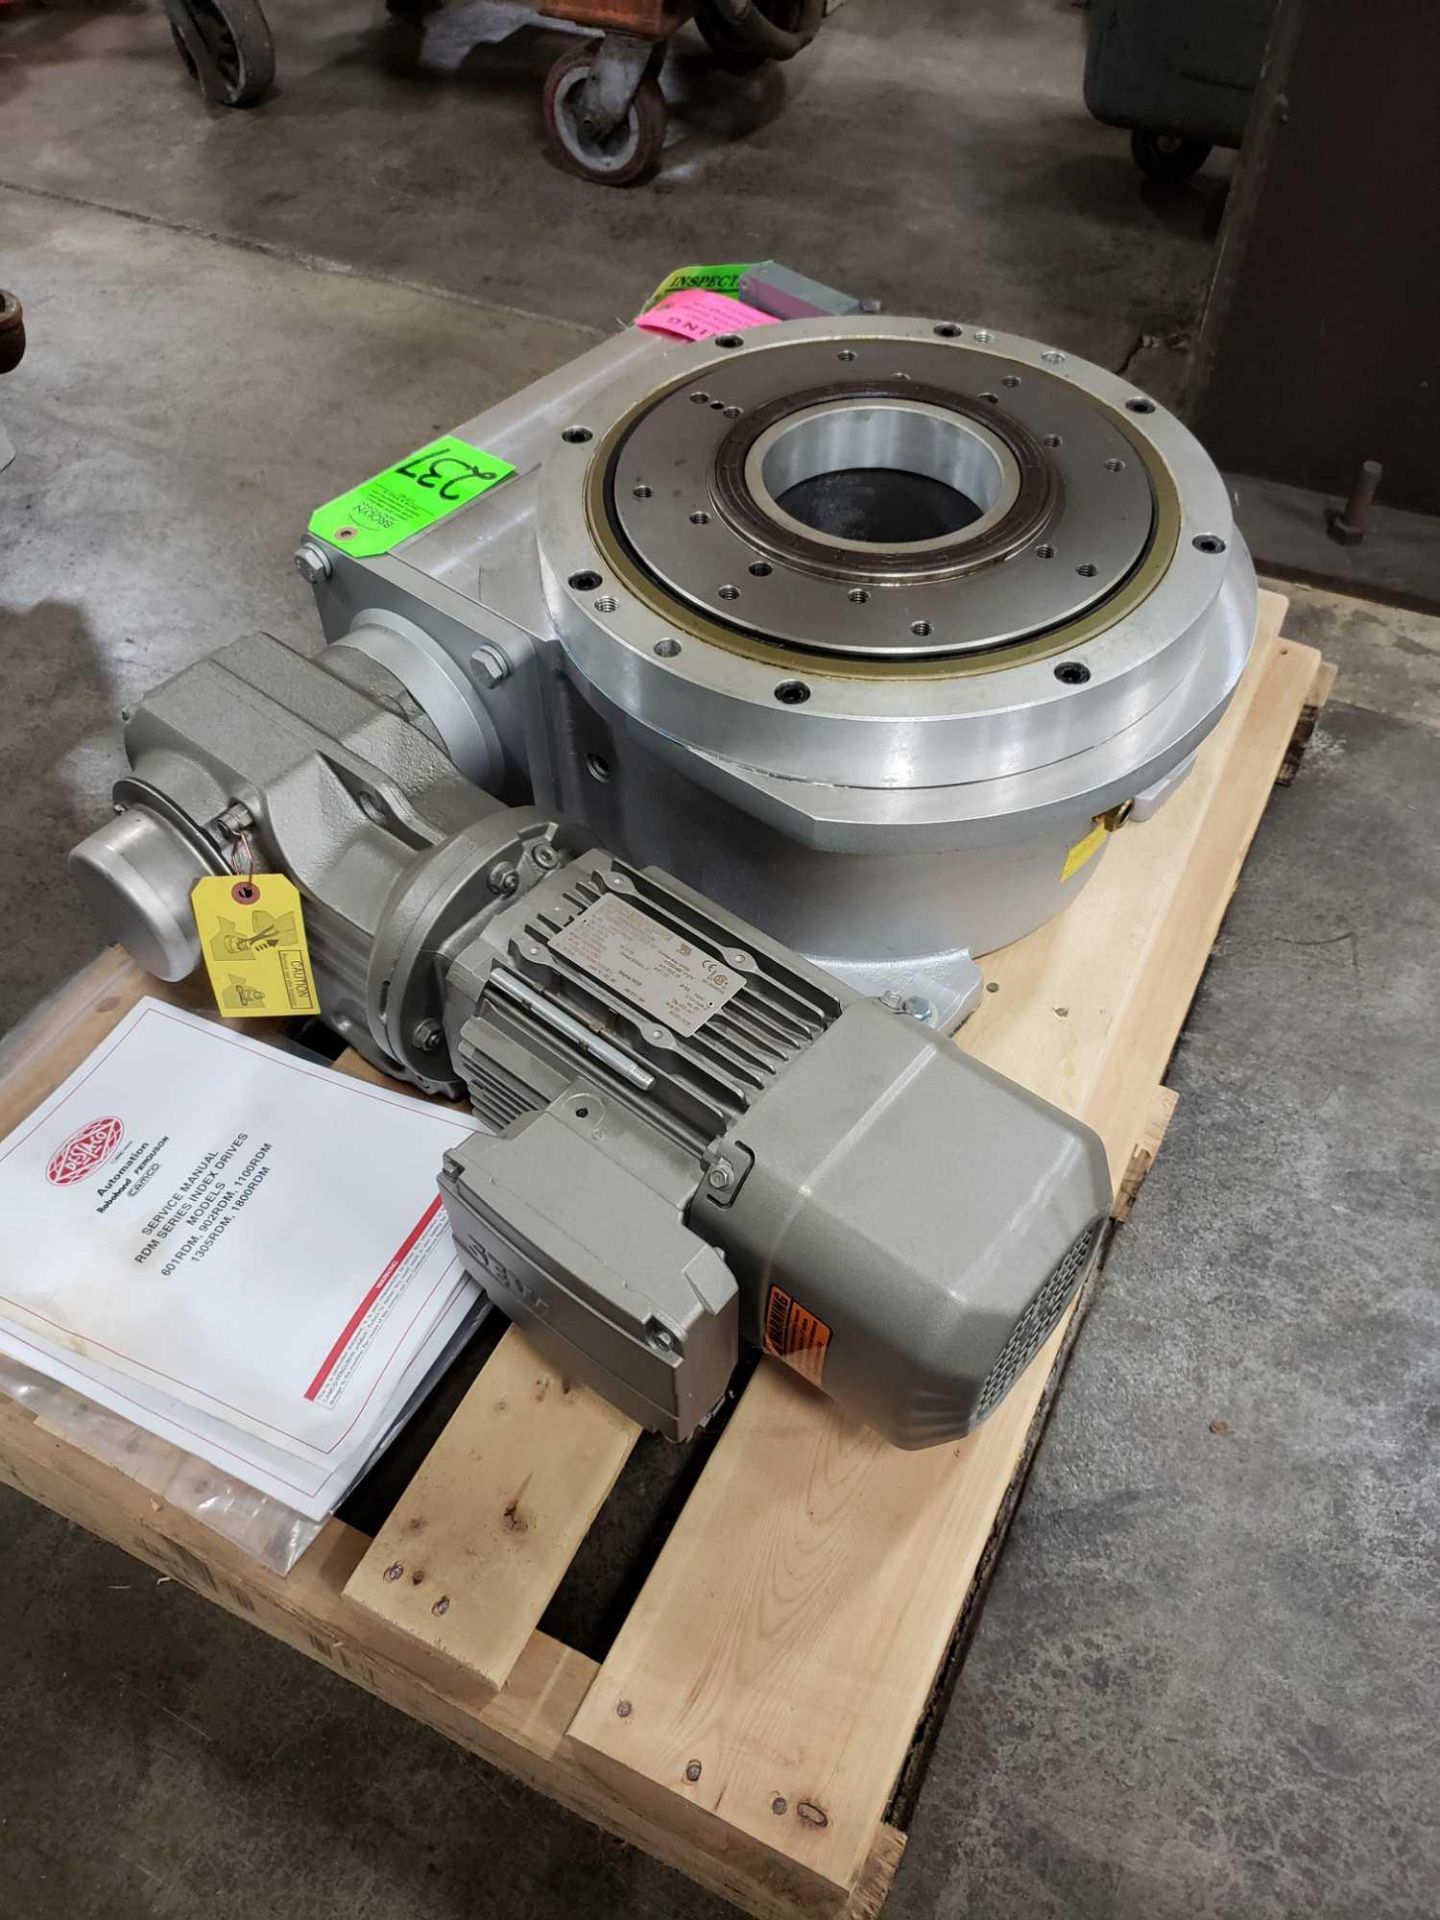 Camco model 1100RDM2H48-330 rotary positioner. New on pallet with paperwork. - Image 5 of 5